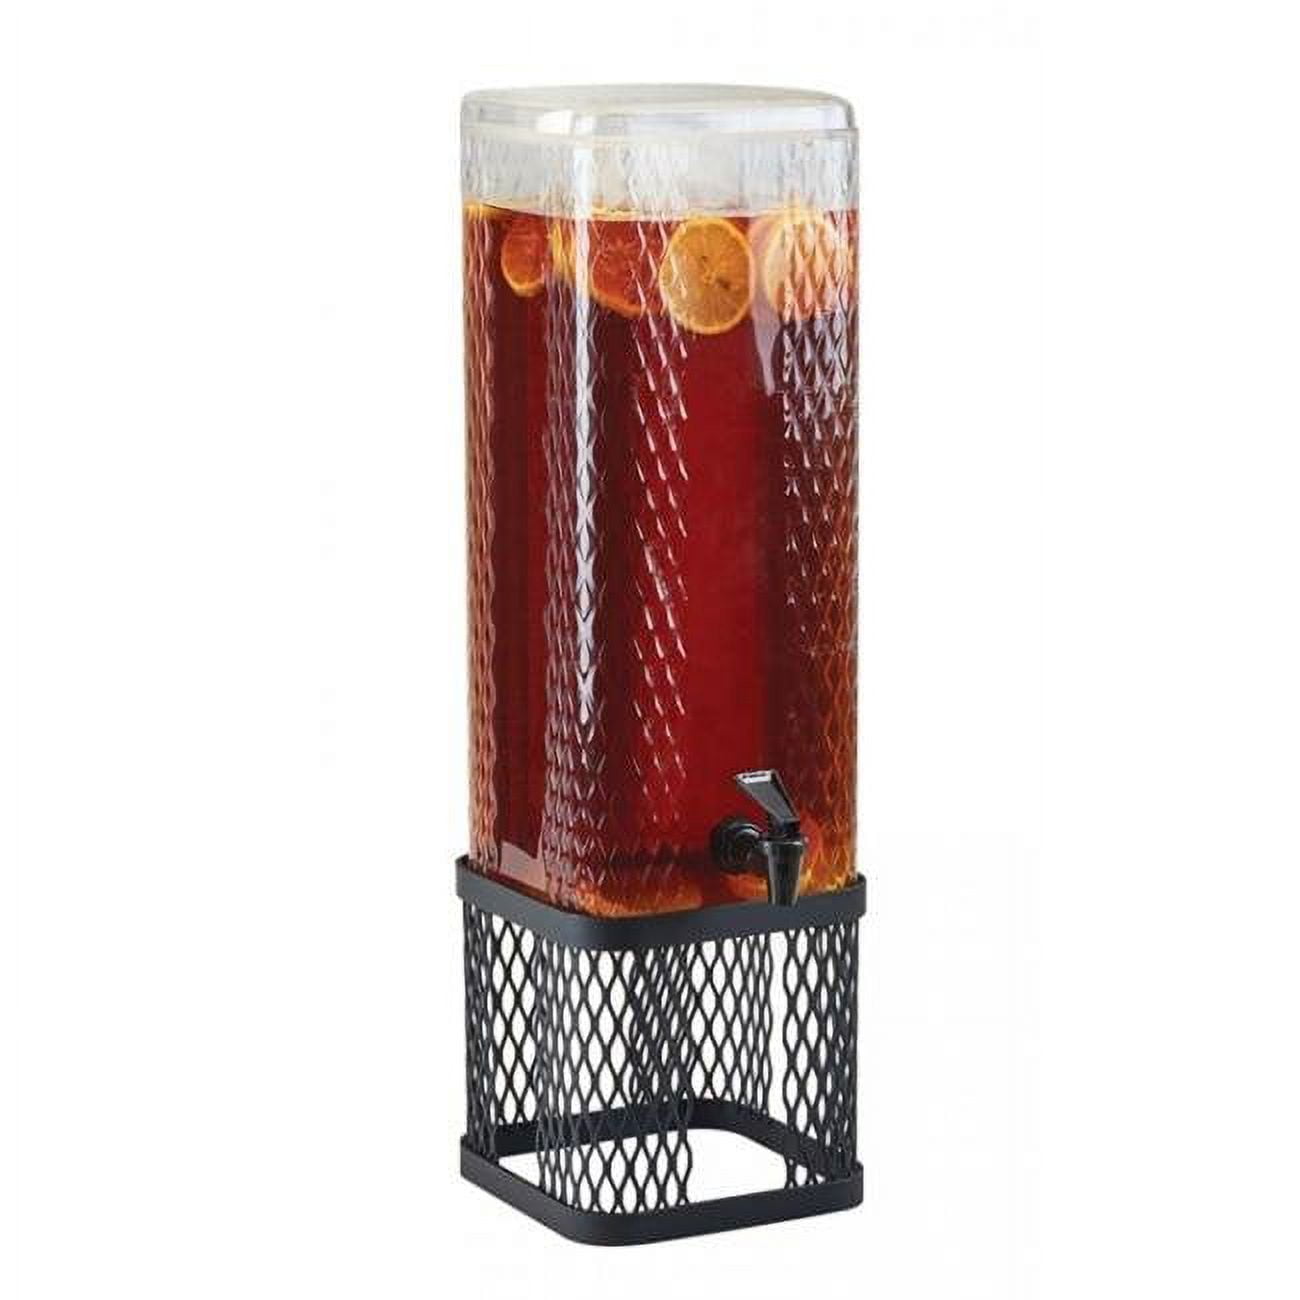 Black Diamond 3 gal Beverage Dispenser with Infusion Chamber & Black Metal Mesh Base - 8.125 x 9.75 x 25.75 in -  Chef 5 Min Meals, CH2842919